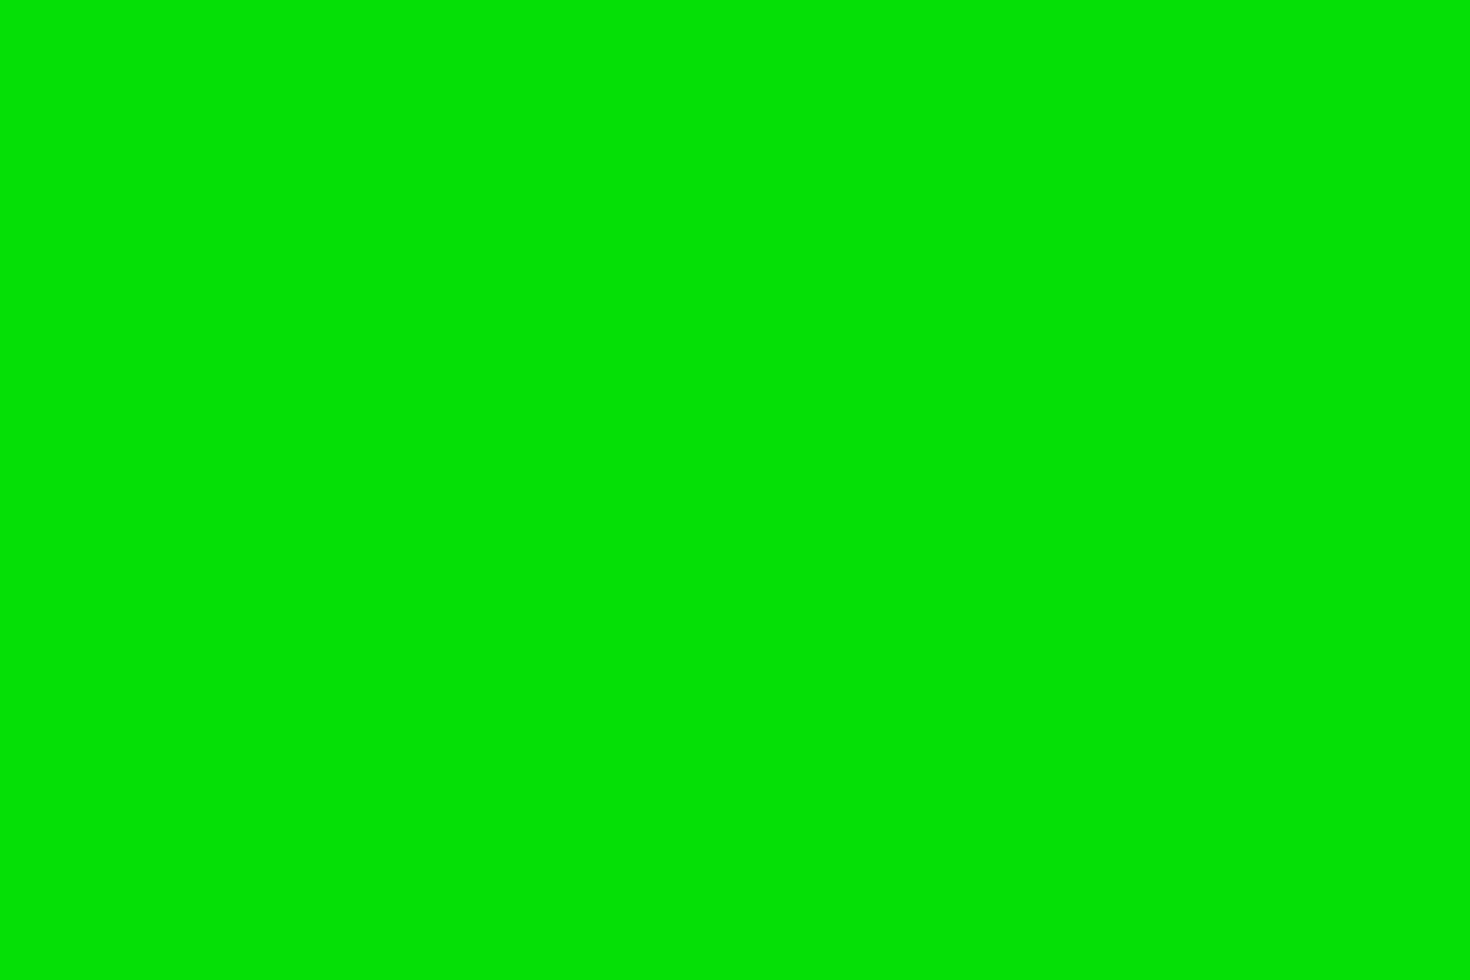 Green colored background. green screen background. green colored chroma key background screen flat style design free Photo